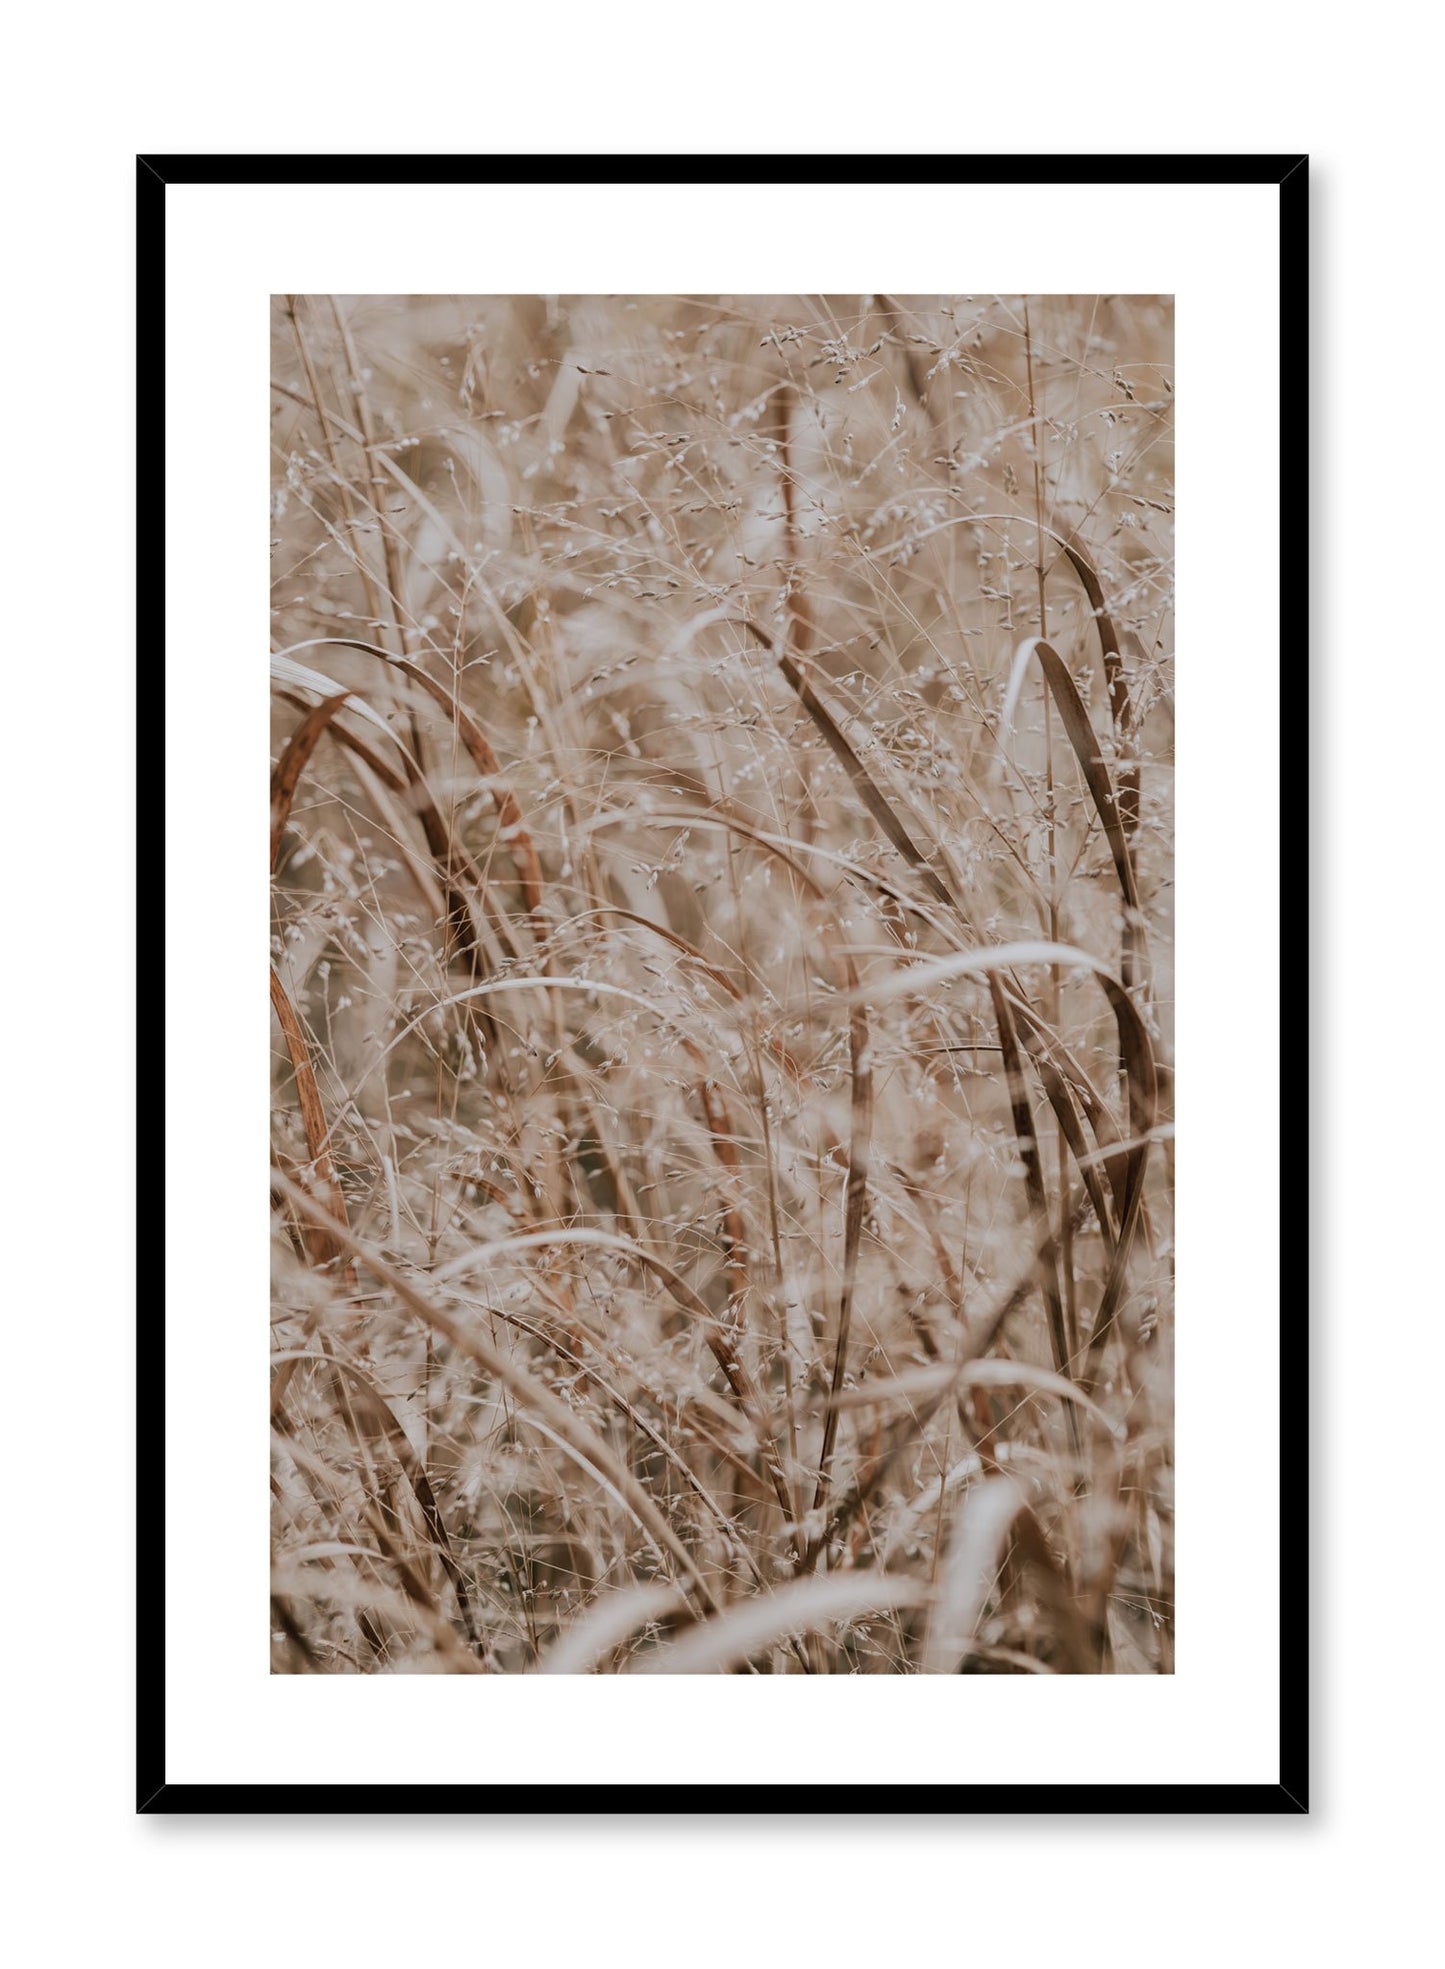 Minimalist design poster by Opposite Wall with Wheat Field photography